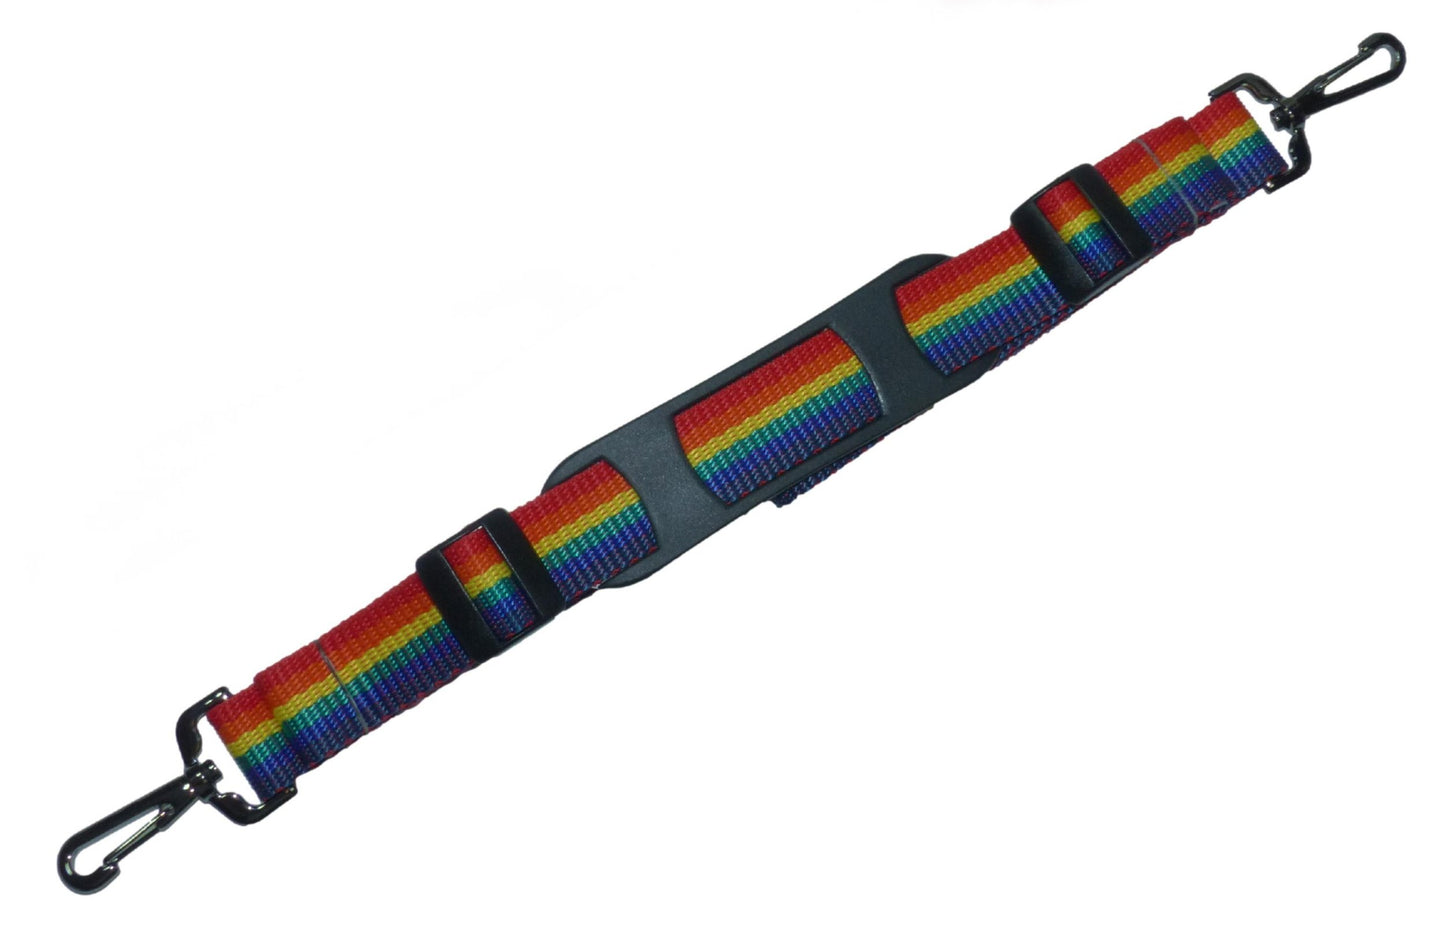 Benristraps 25mm Bag Strap with Metal Buckles and Shoulder Pad, 150cm in rainbow